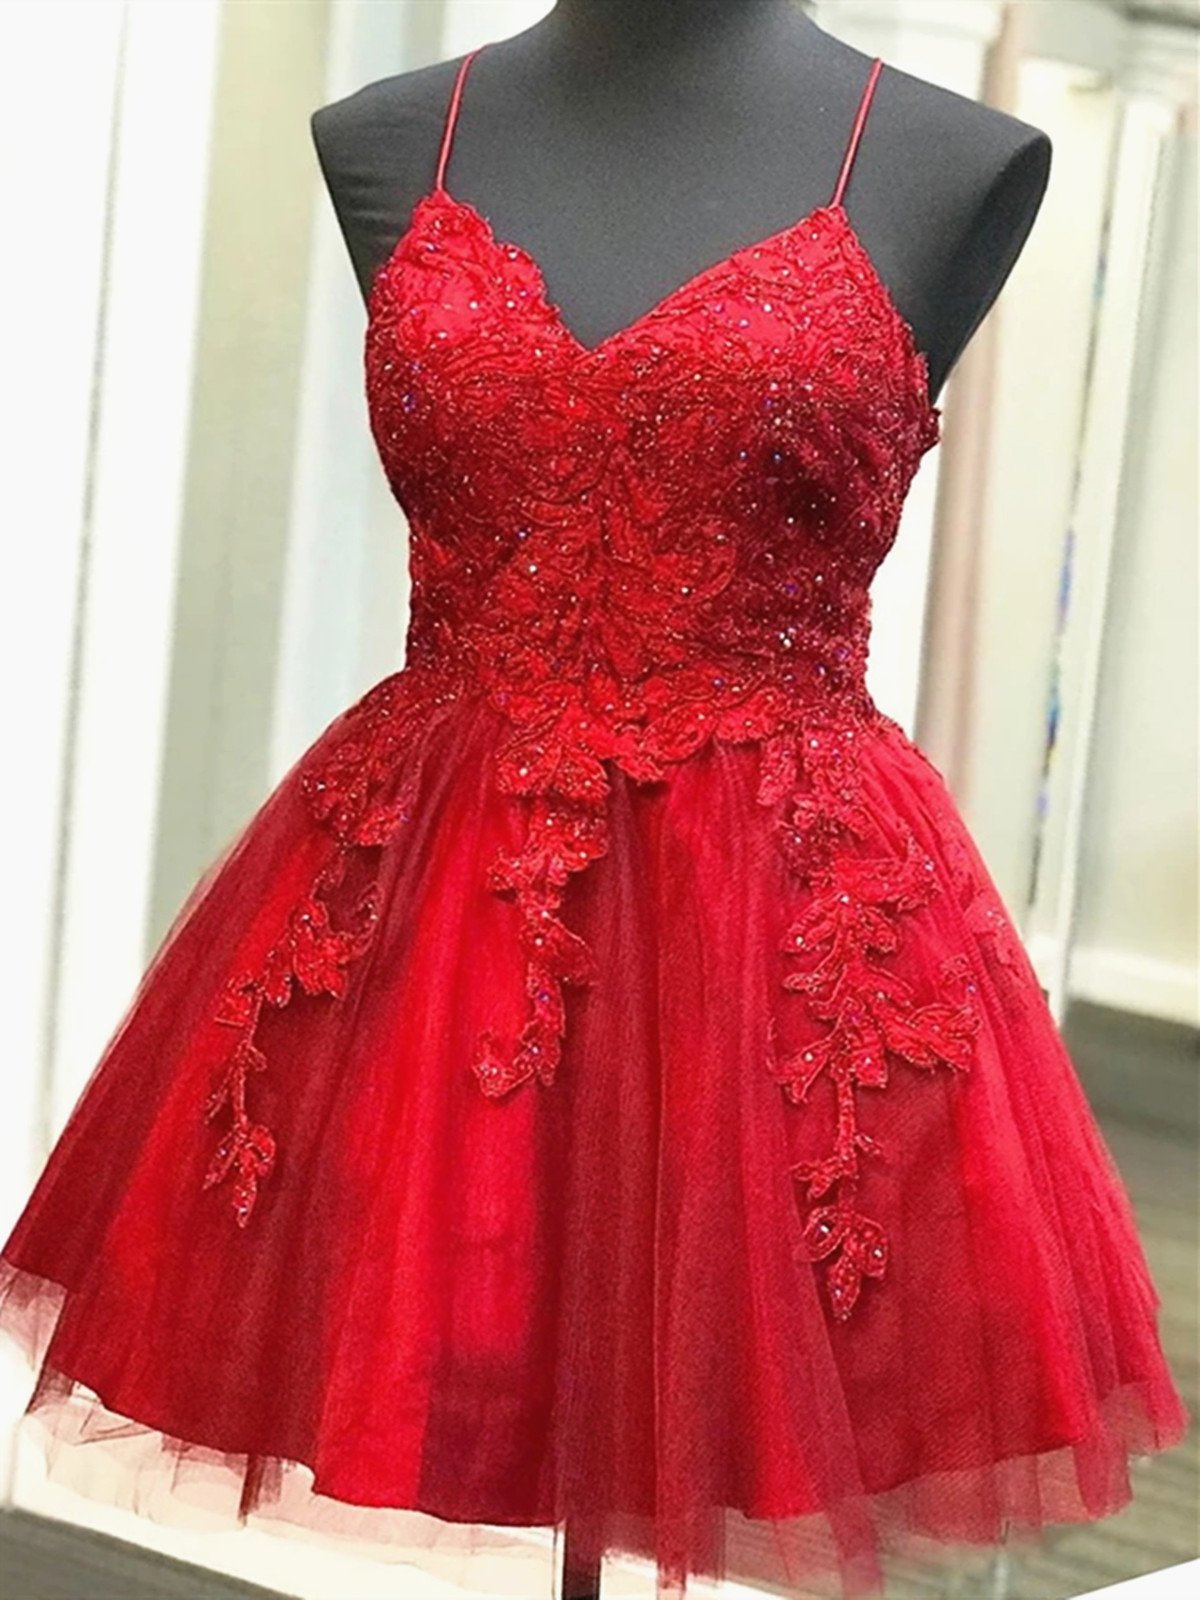 A Line Prom Dress, Red Prom Dresses, Lace Prom Dresses, Appliques Evening Dresses, Party Dresses, Sexy Evening Gowns, Short Evening Dress,